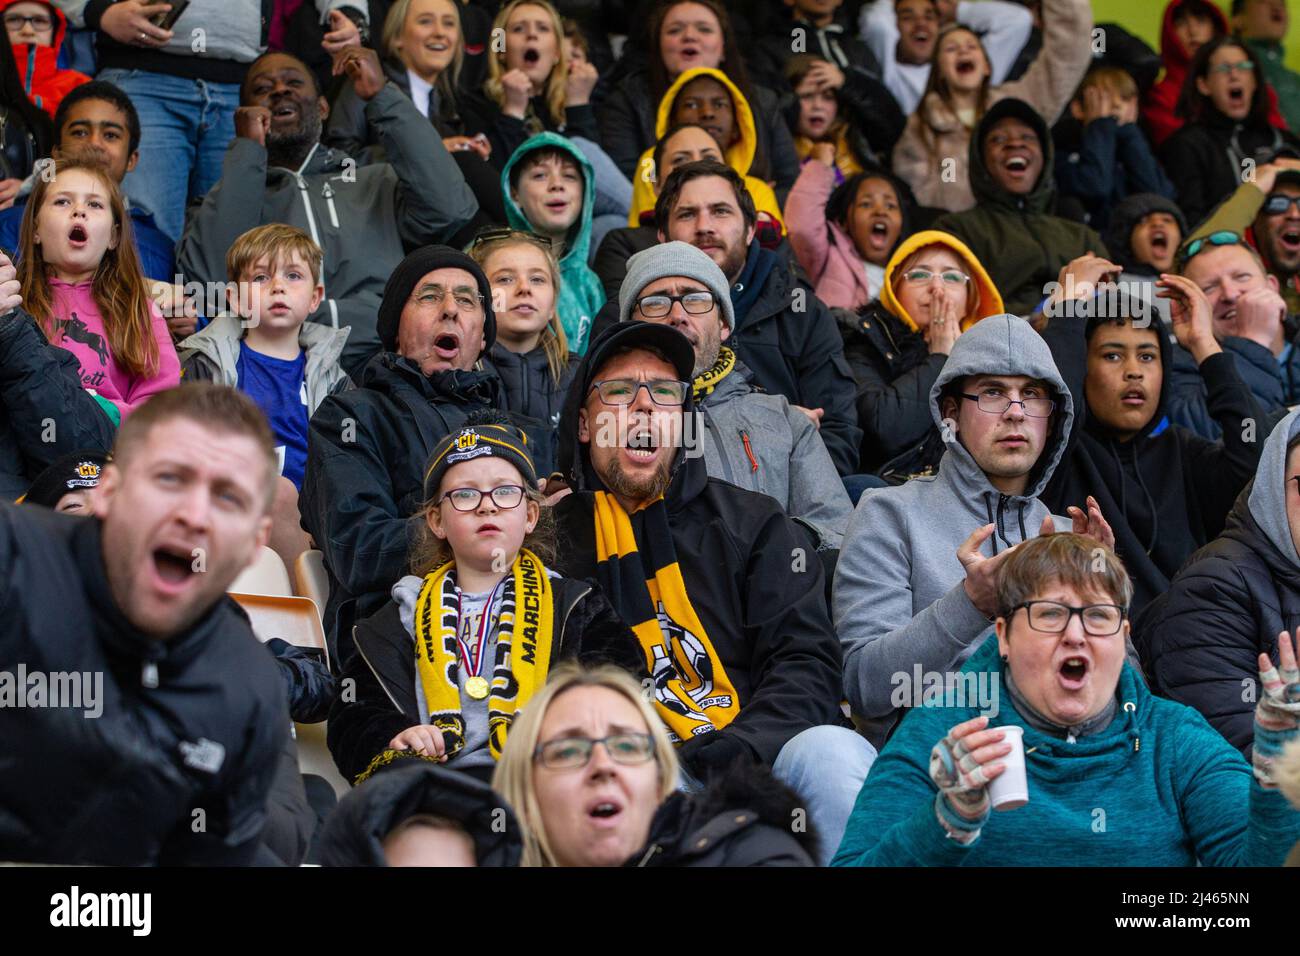 mixed group of spectators with animated facial expressions watching football match in UK Stock Photo